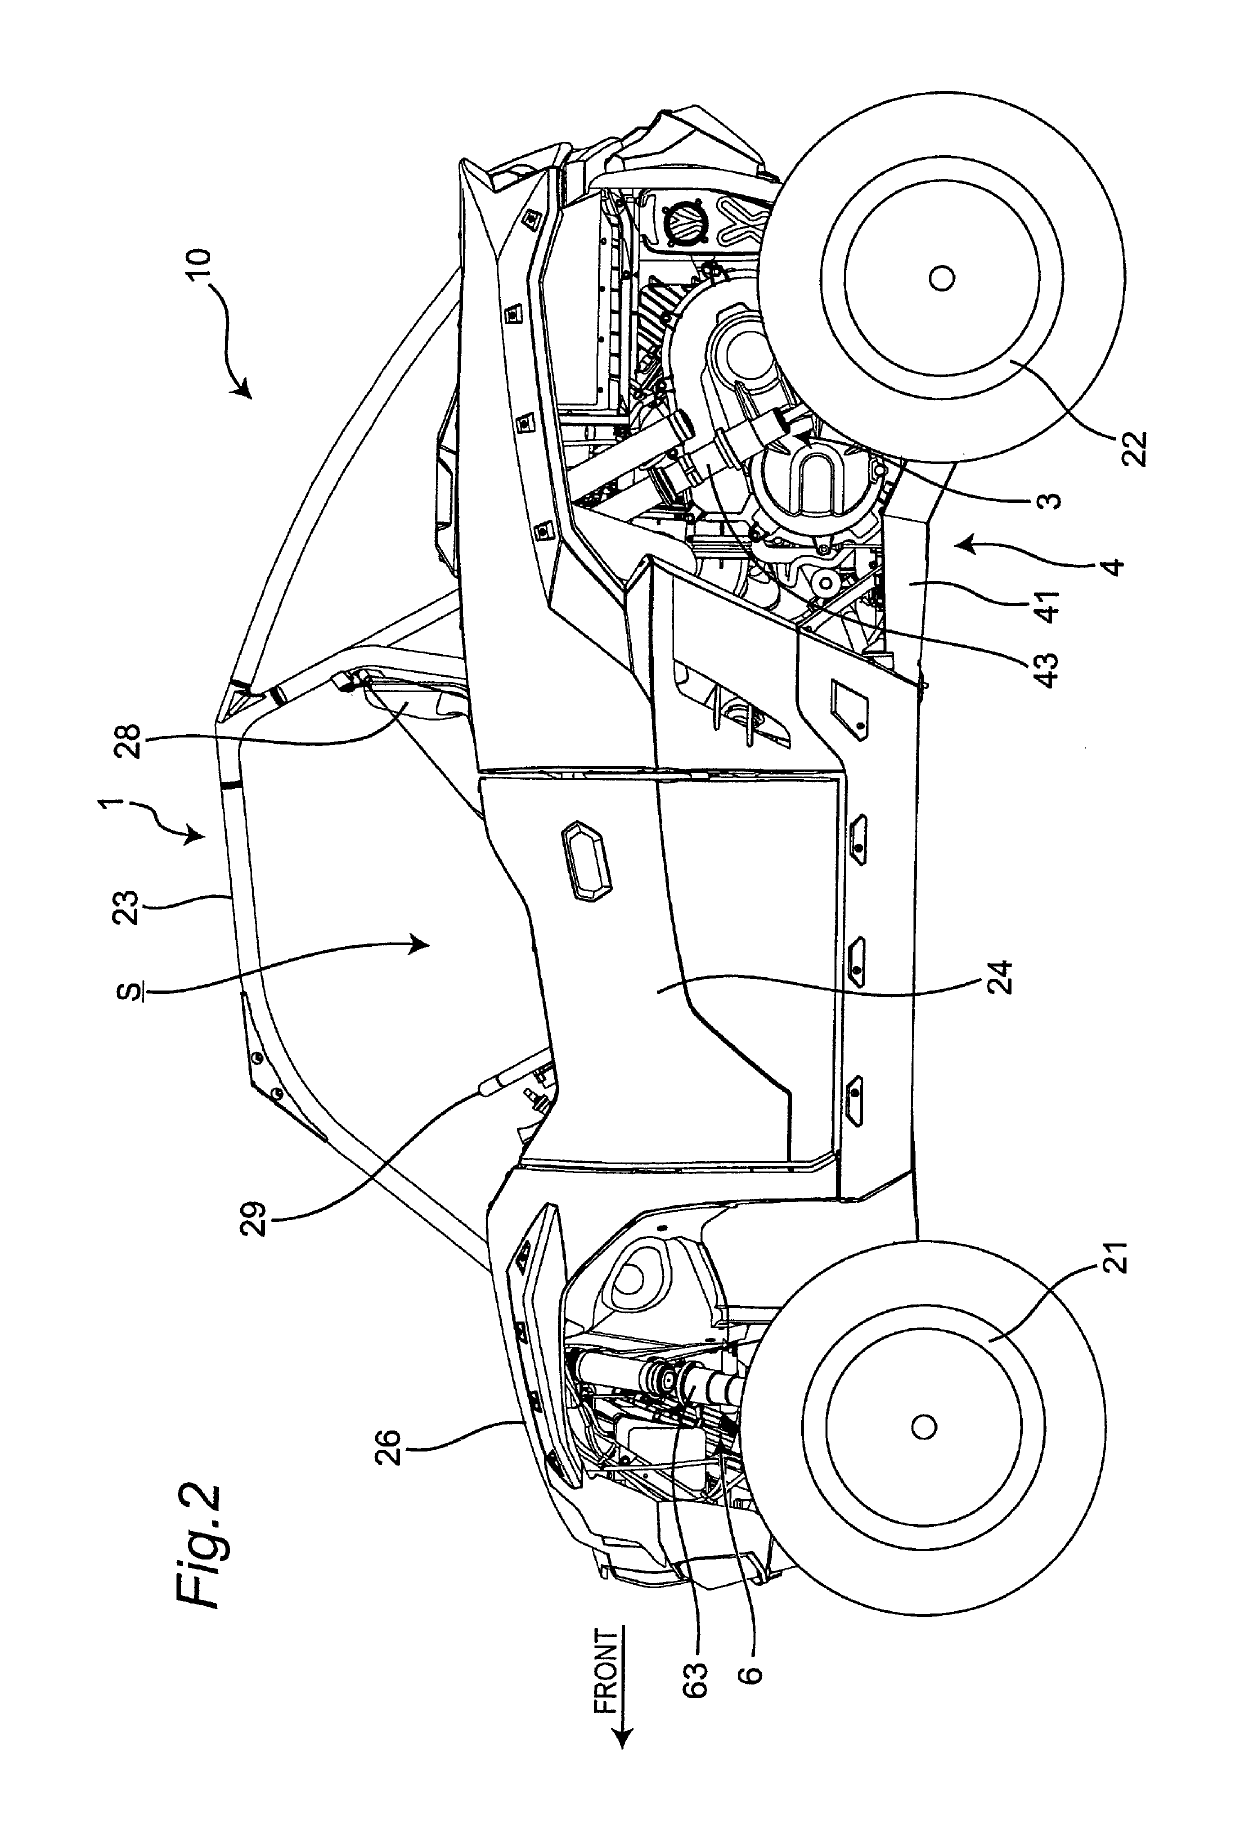 Mounting structure for power unit of utility vehicle